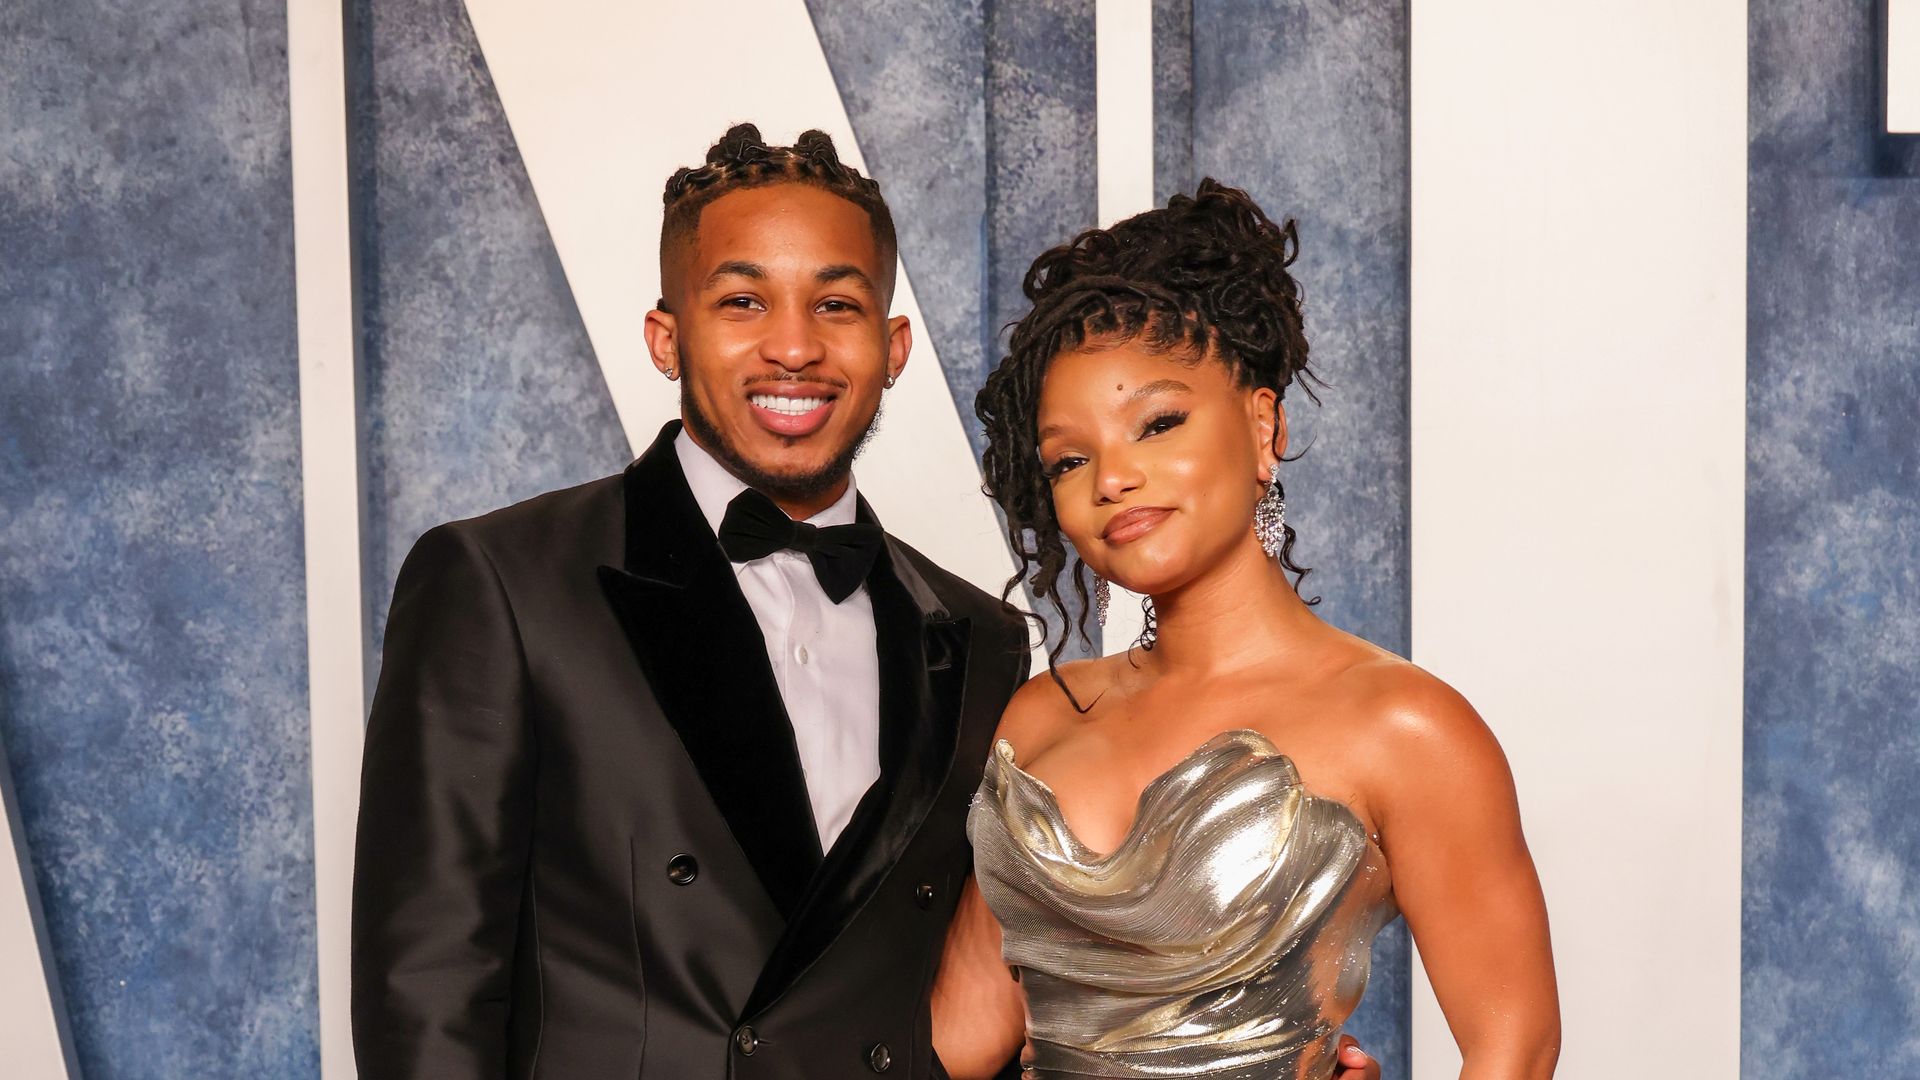 DDG and Halle Bailey attend the 2023 Vanity Fair Oscar Party Hosted By Radhika Jones at Wallis Annenberg Center for the Performing Arts on March 12, 2023 in Beverly Hills, California